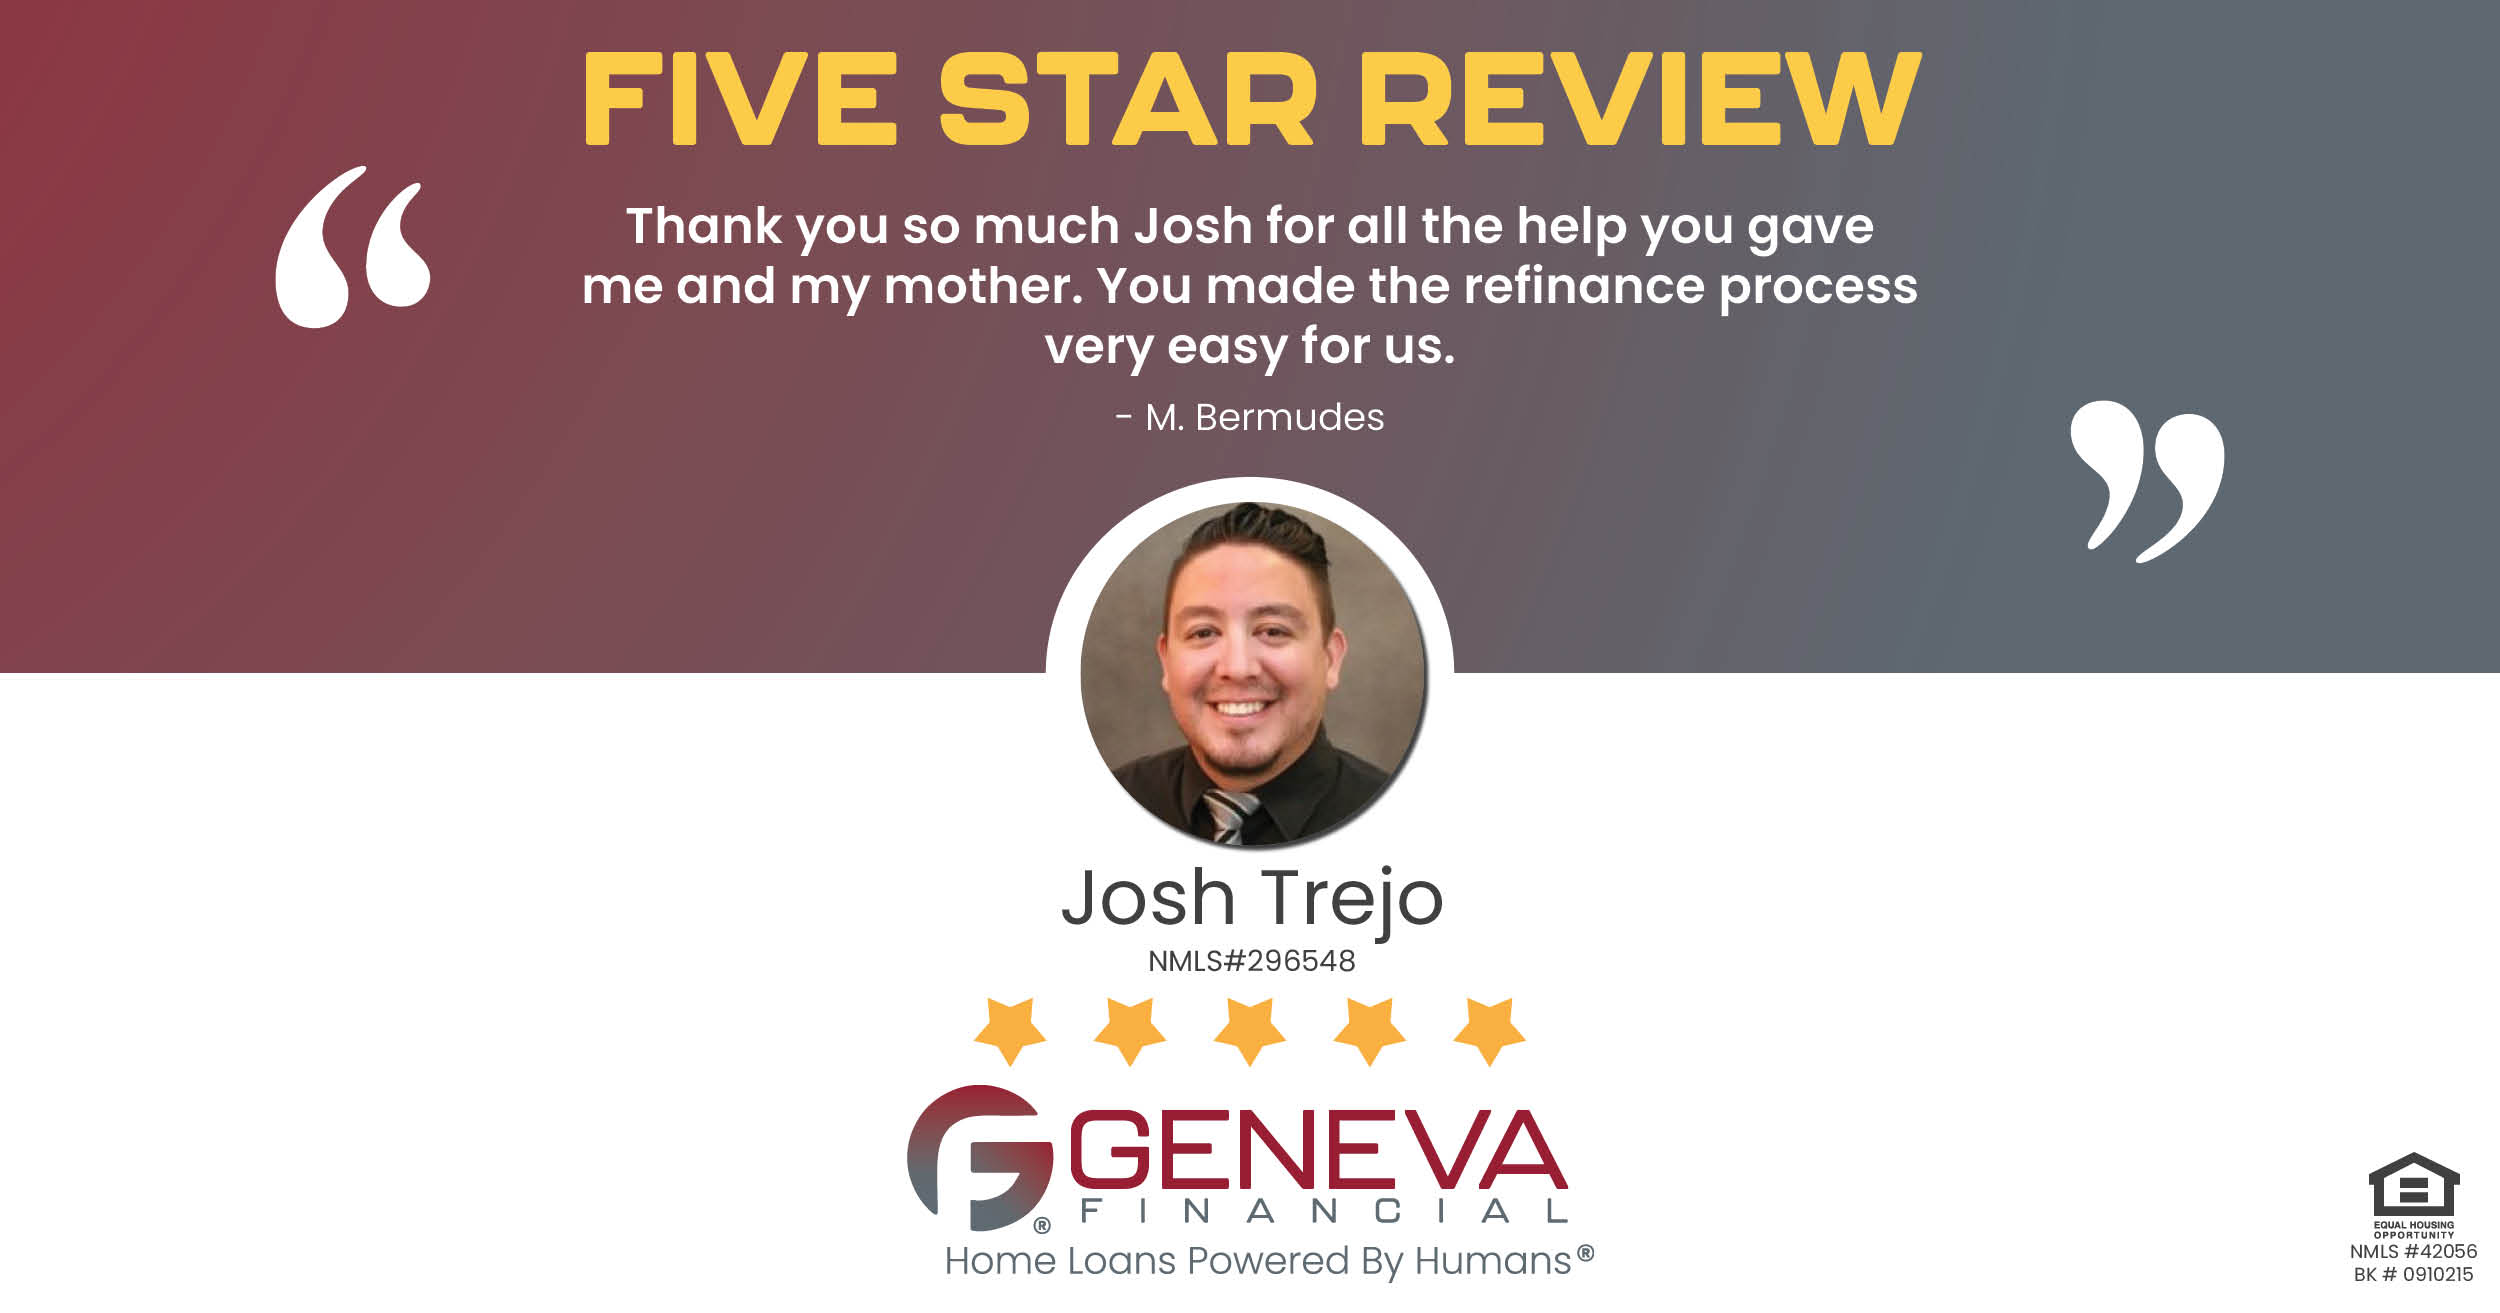 5 Star Review for Josh Trejo, Licensed Mortgage Loan Officer with Geneva Financial, Temecula, California – Home Loans Powered by Humans®.